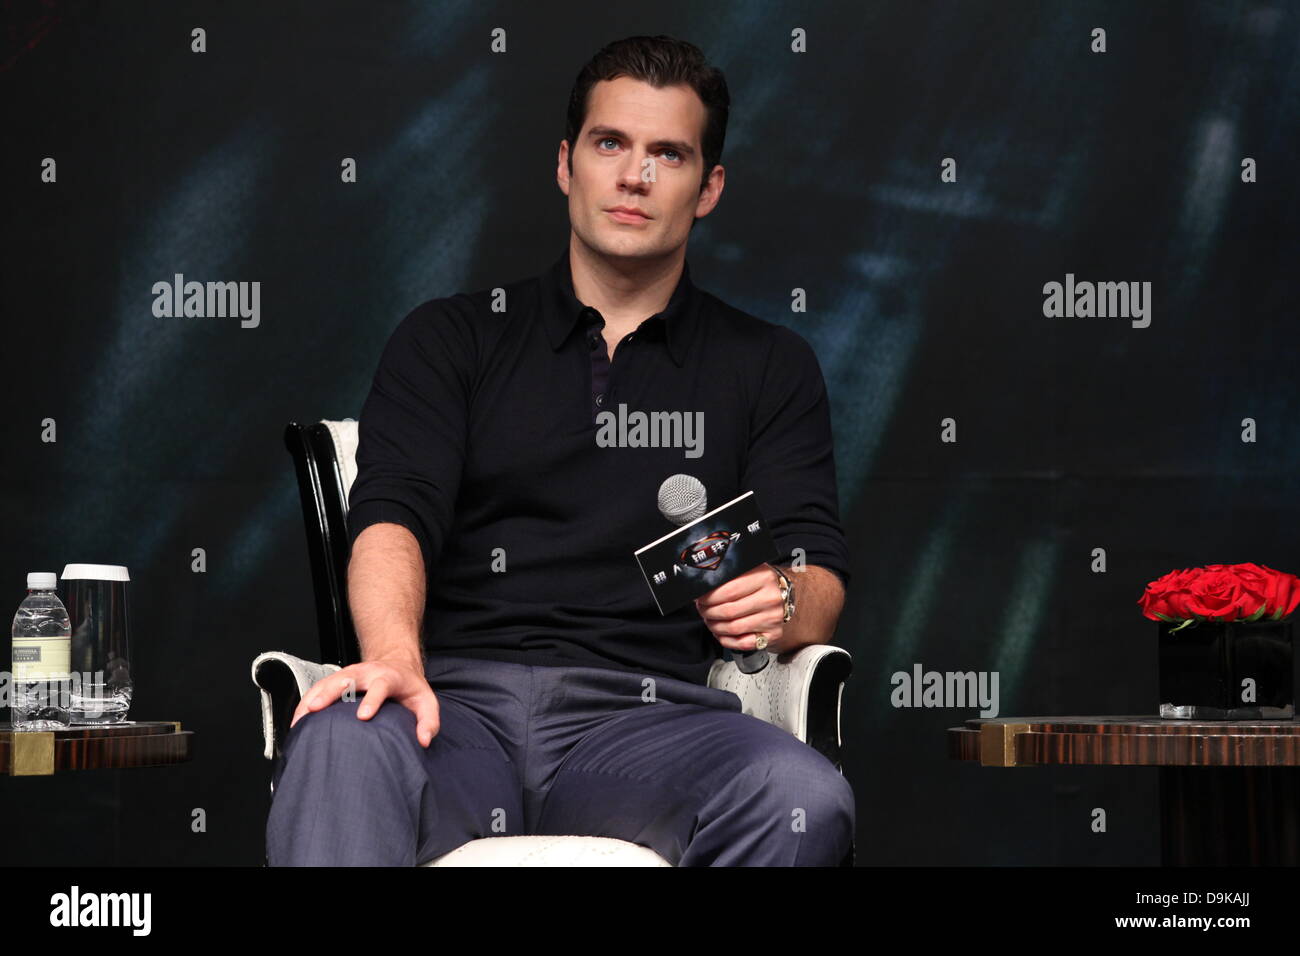 Shanghai, China. 20th June, 2013. Henry Cavill at press conference of movie Superman: The Man of Steel in Shanghai, China on Thursday June 20, 2013. Credit:  Top Photo Corporation/Alamy Live News Stock Photo